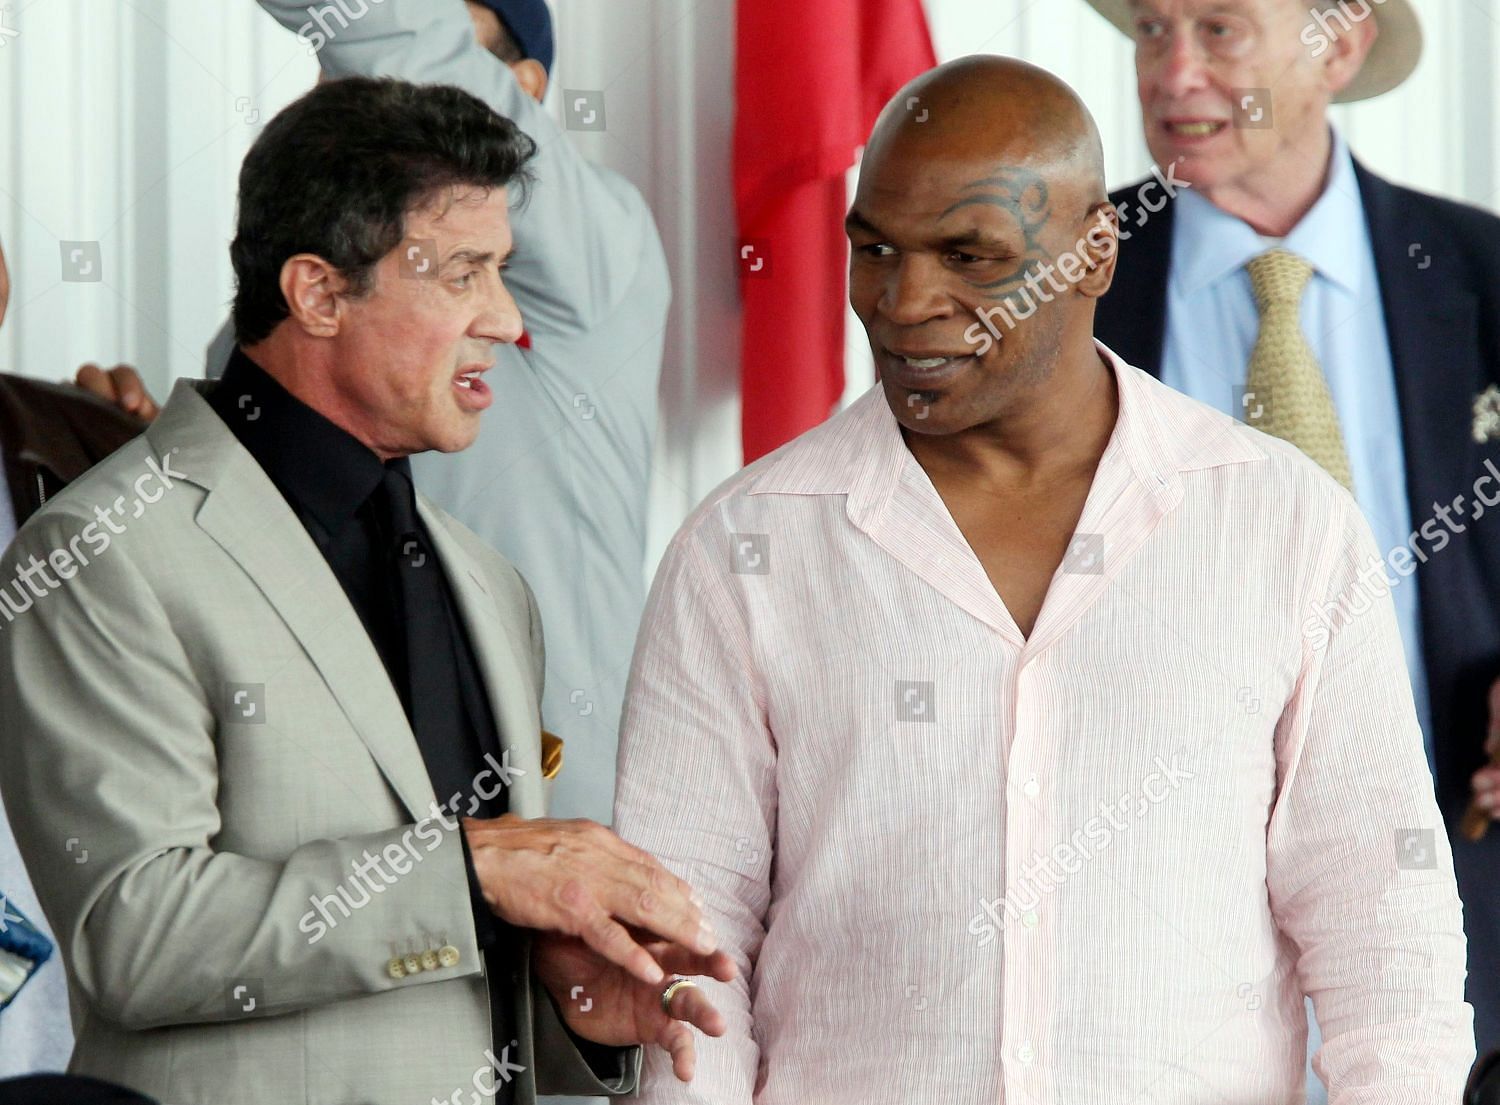 Sylvester Stallone with Mike Tyson. Credits: shutterstock